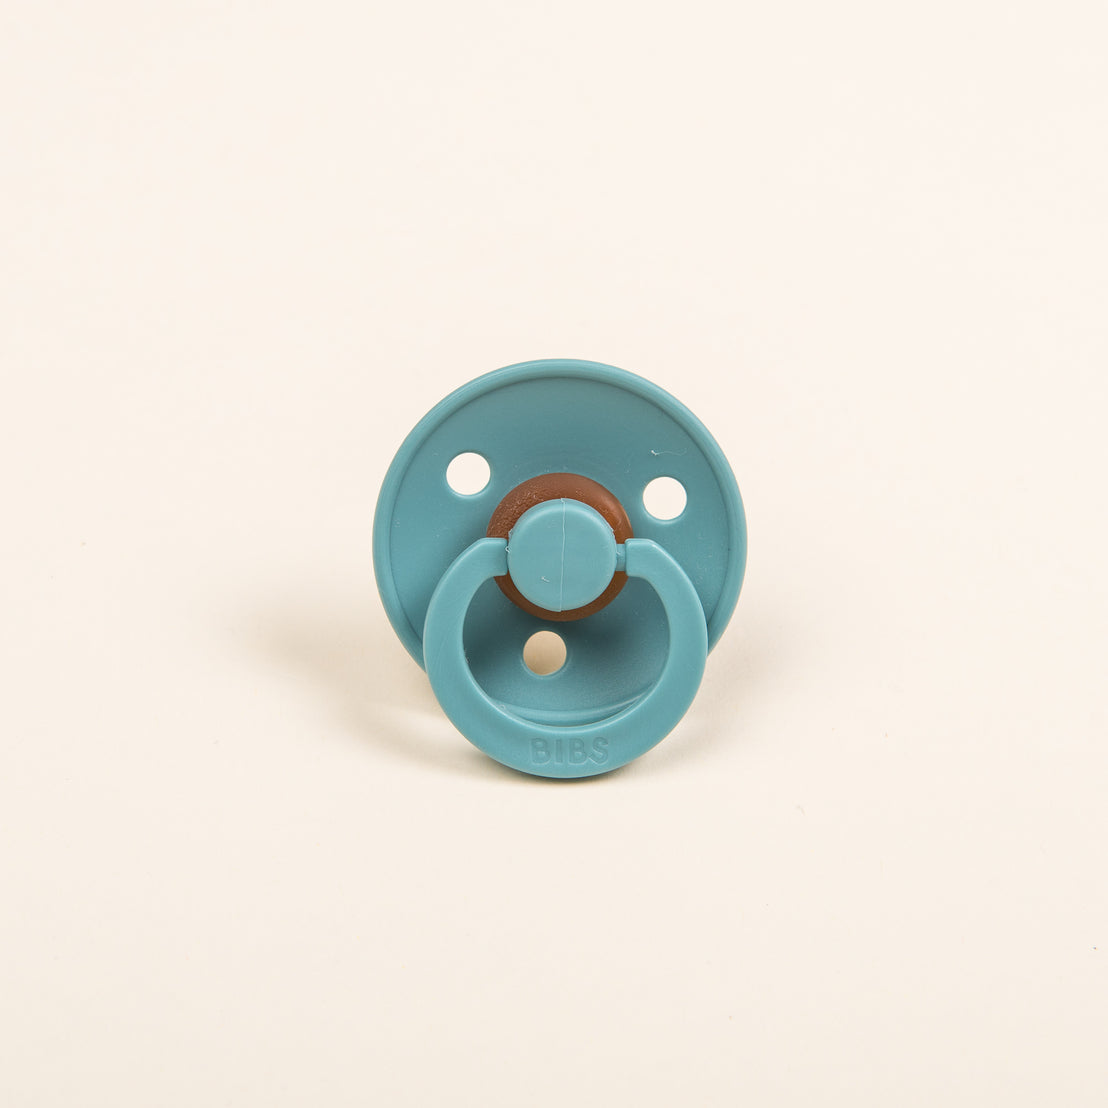 Aiden Silly Bunny Buddy & Pacifier: A teal-colored baby pacifier with a round shield and a wooden pull knob, perfect for coming home from the hospital, placed against a plain light beige background.